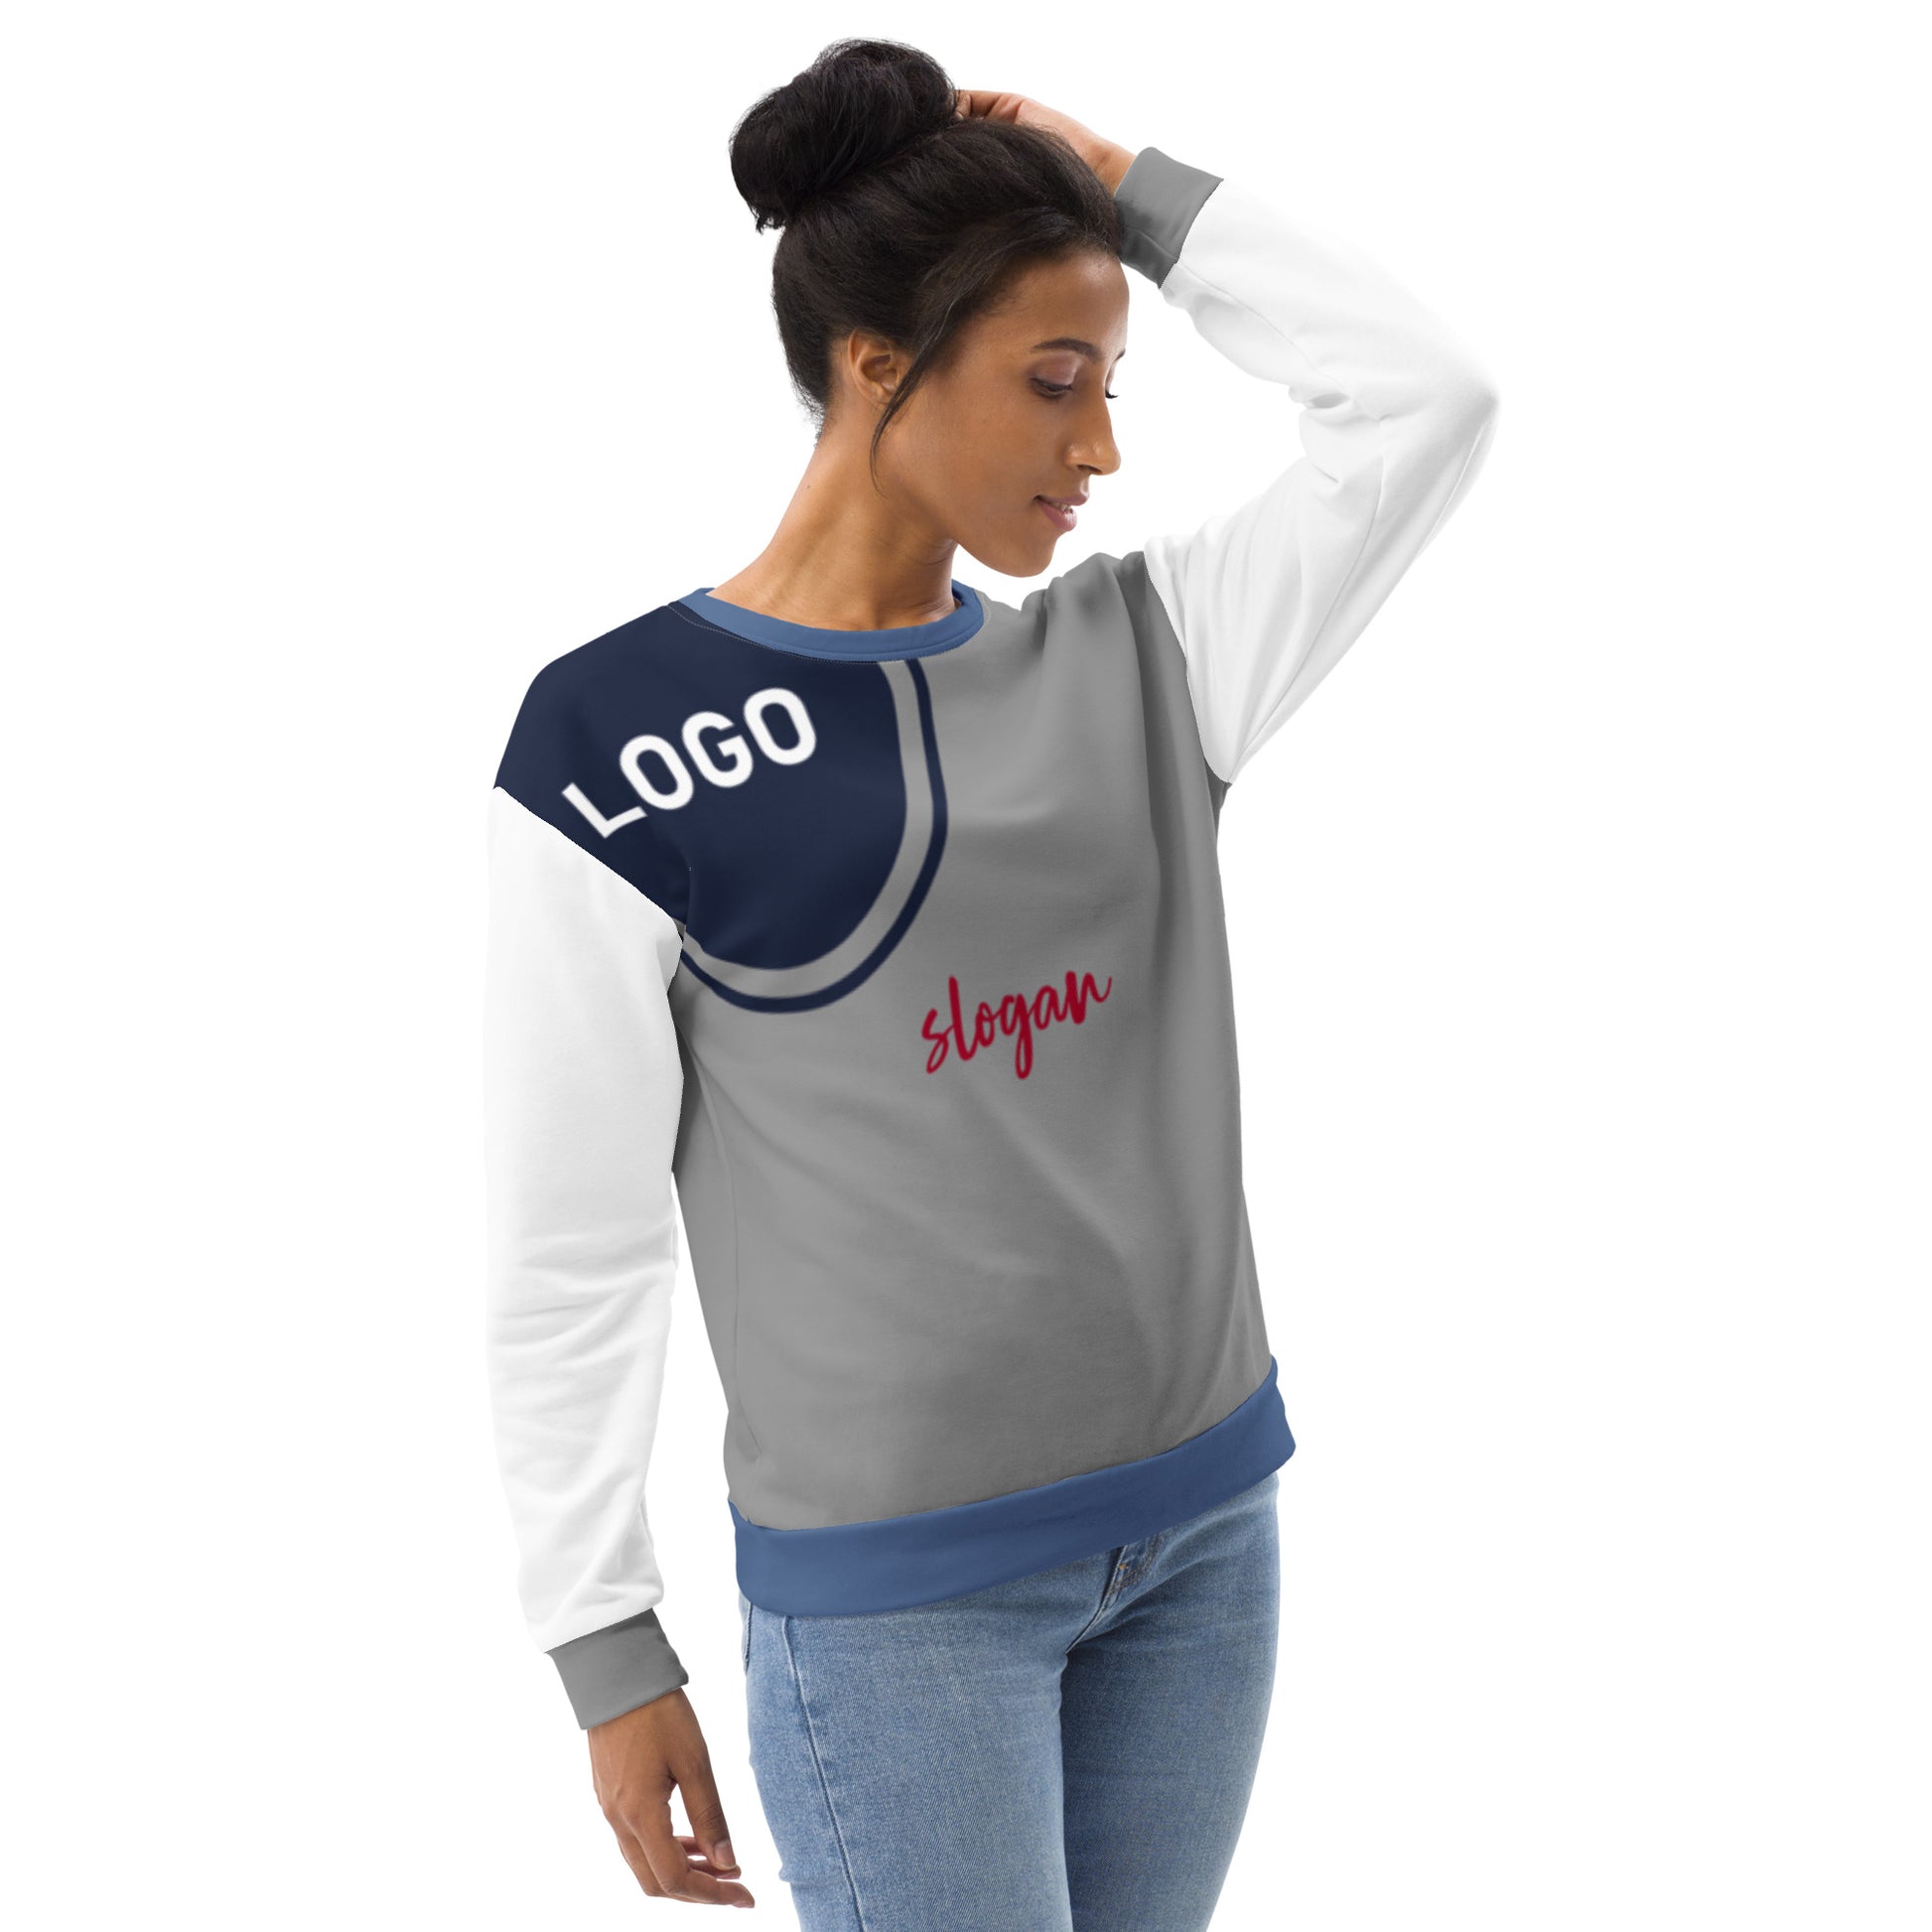 TIME OF VIBES - Unisex Pullover CORPORATE - €59.00